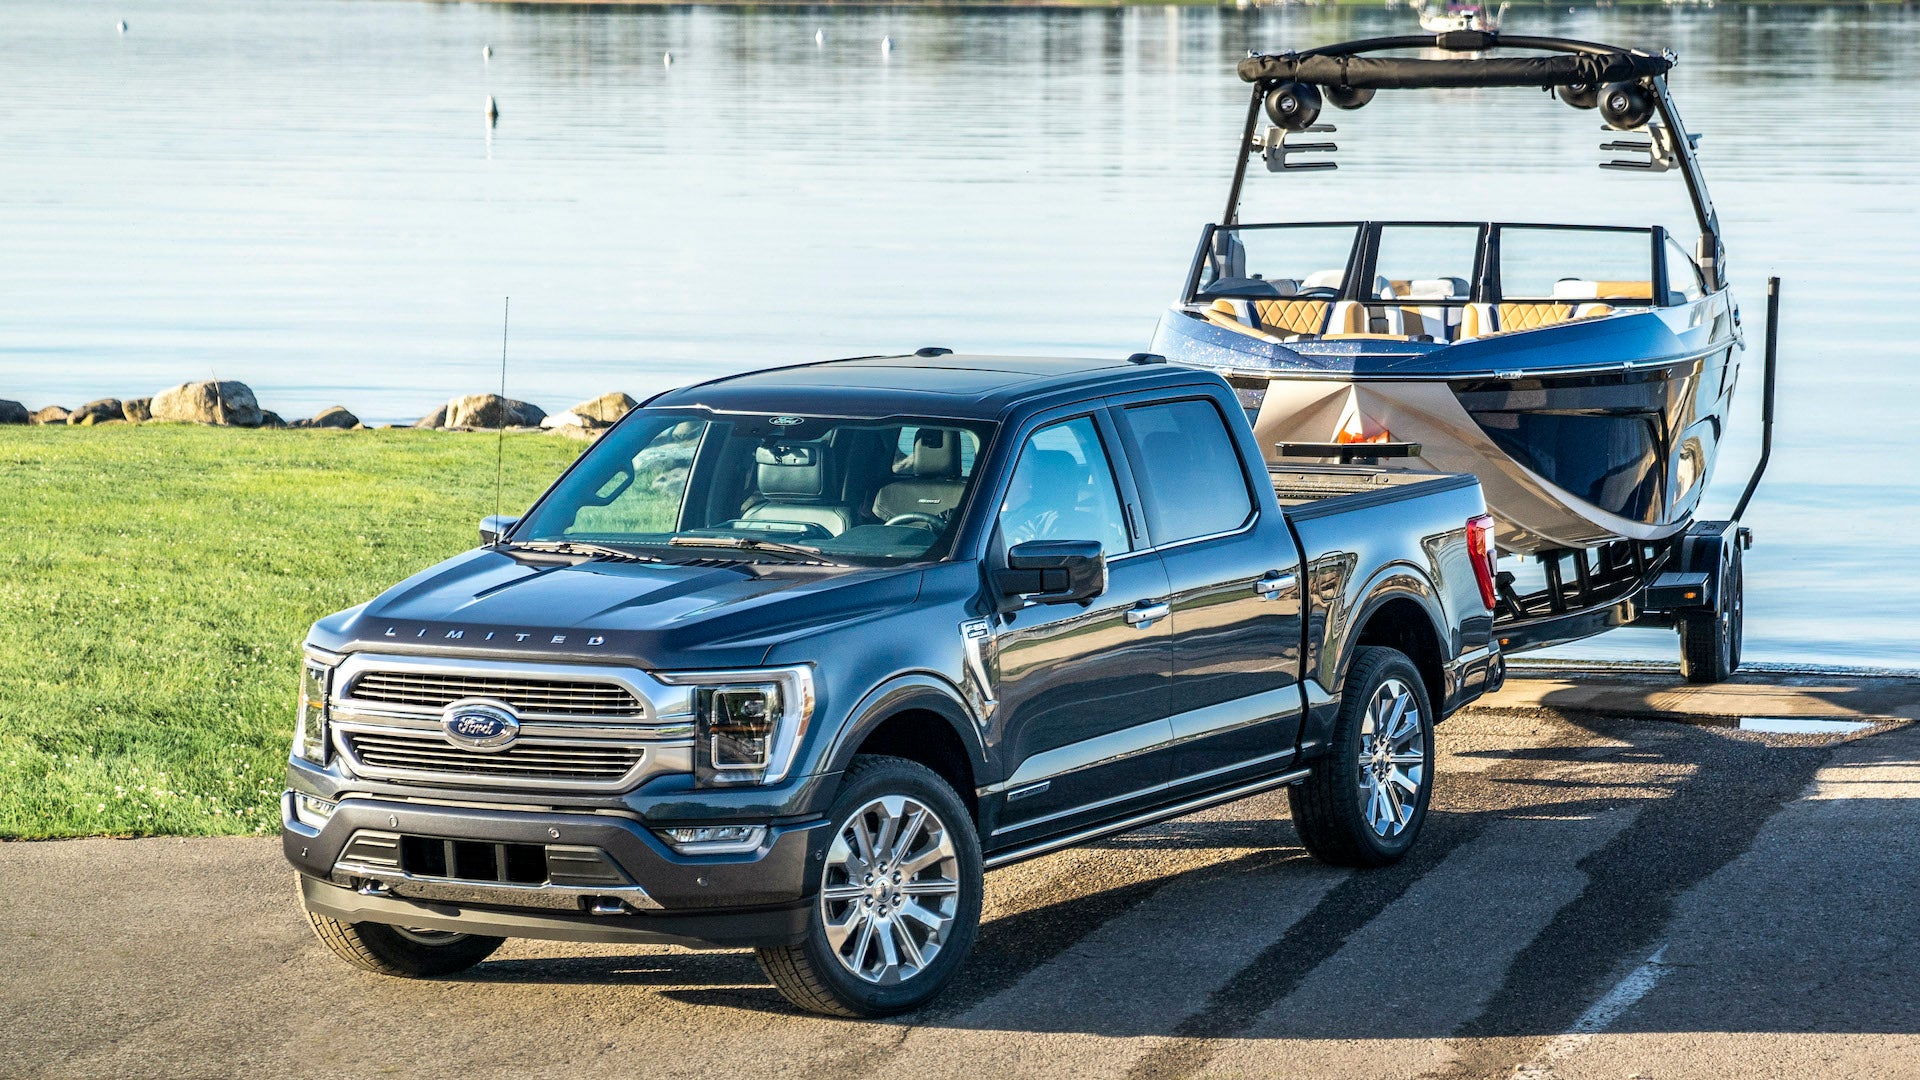 Hybrid 2021 Ford F-150 PowerBoost Targets 700-Mile Range, 12,000-Pound Tow Rating